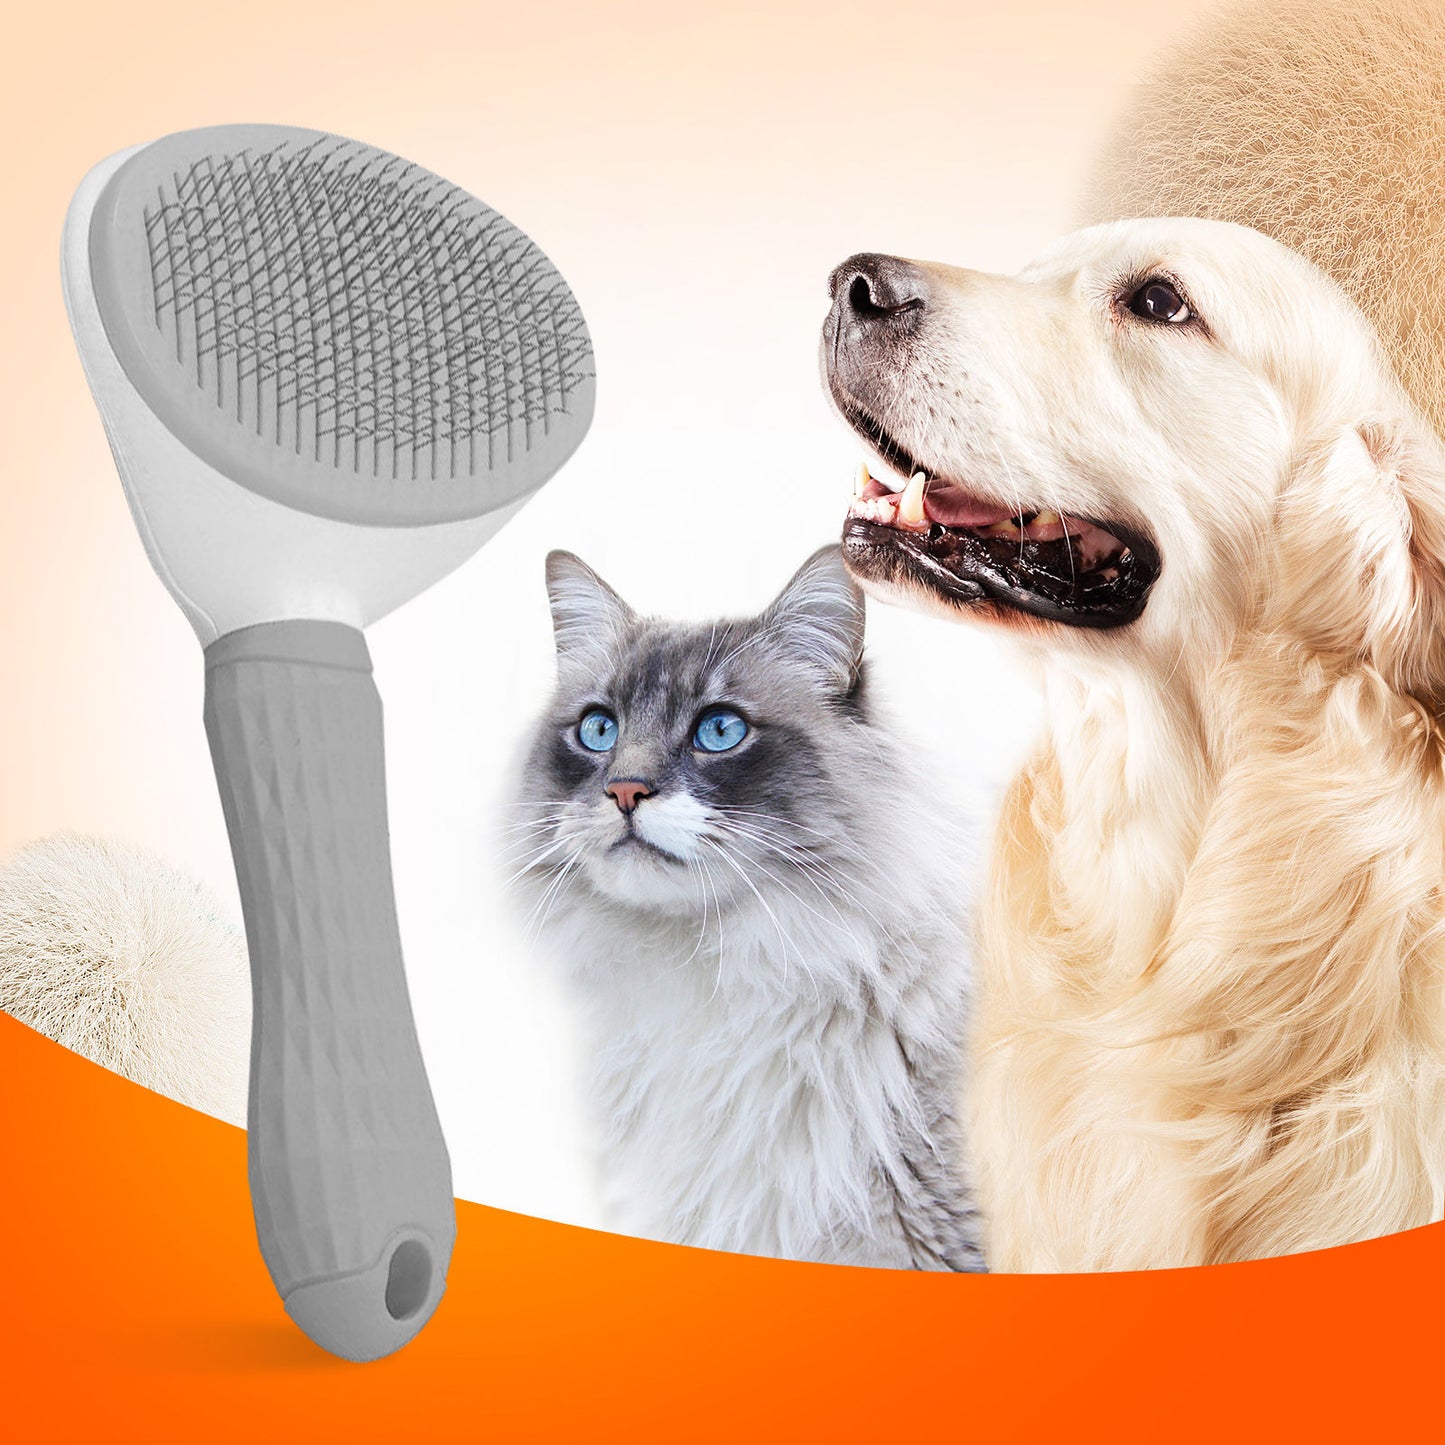 Pawfriends Pet Dog Cat Grooming Comb Brush Tool Gently Removes Loose Knots Mats Grey